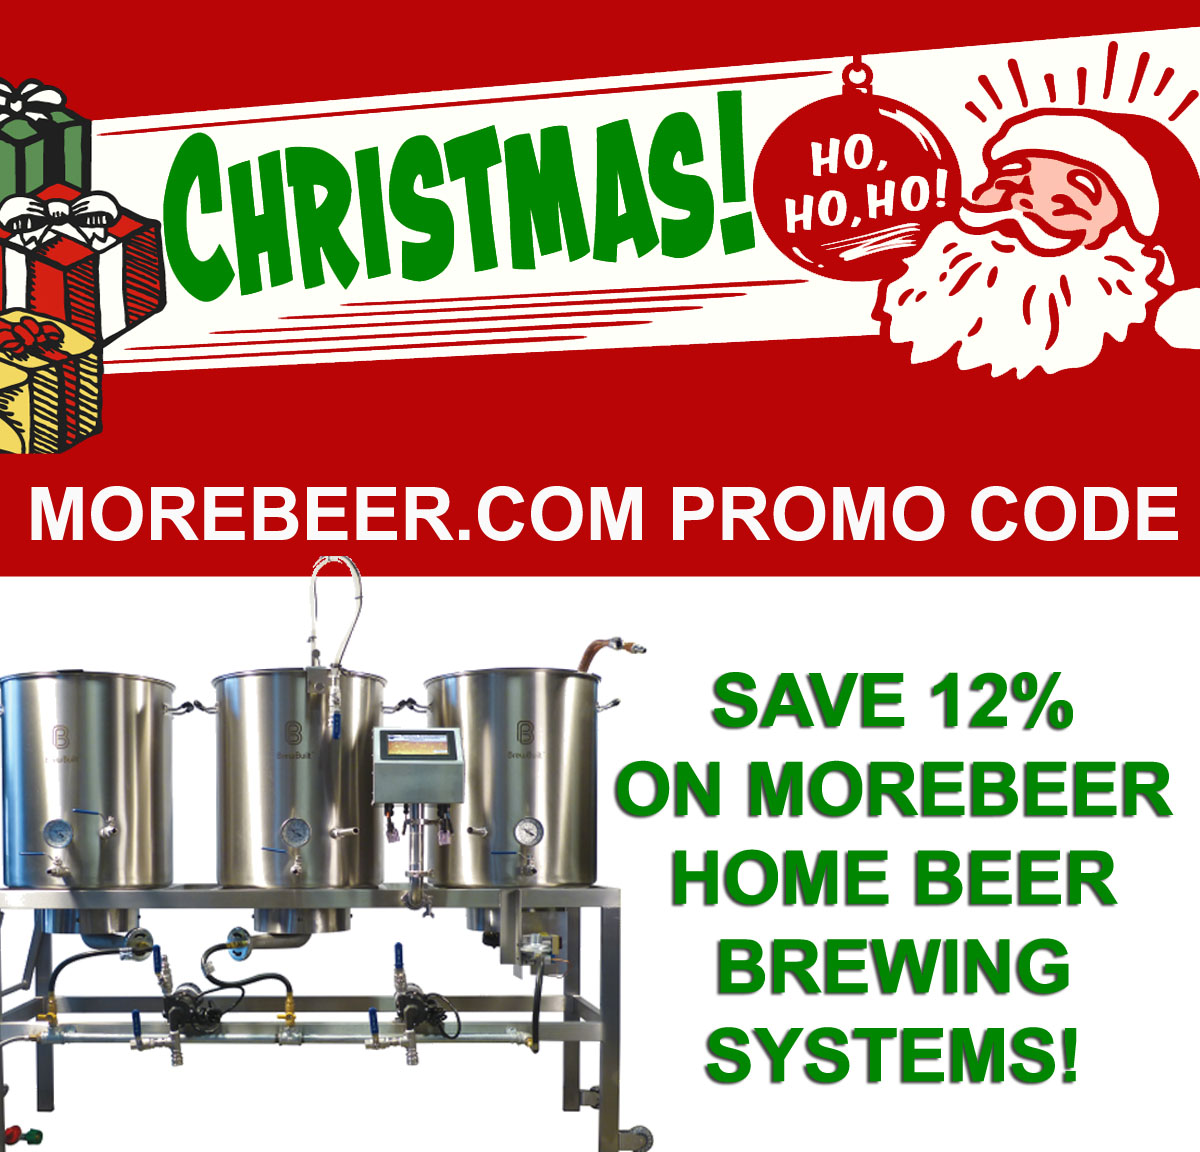  Home Brewer Promo Code for Save 12% On More Beer Homebrewing Systems! Coupon Code